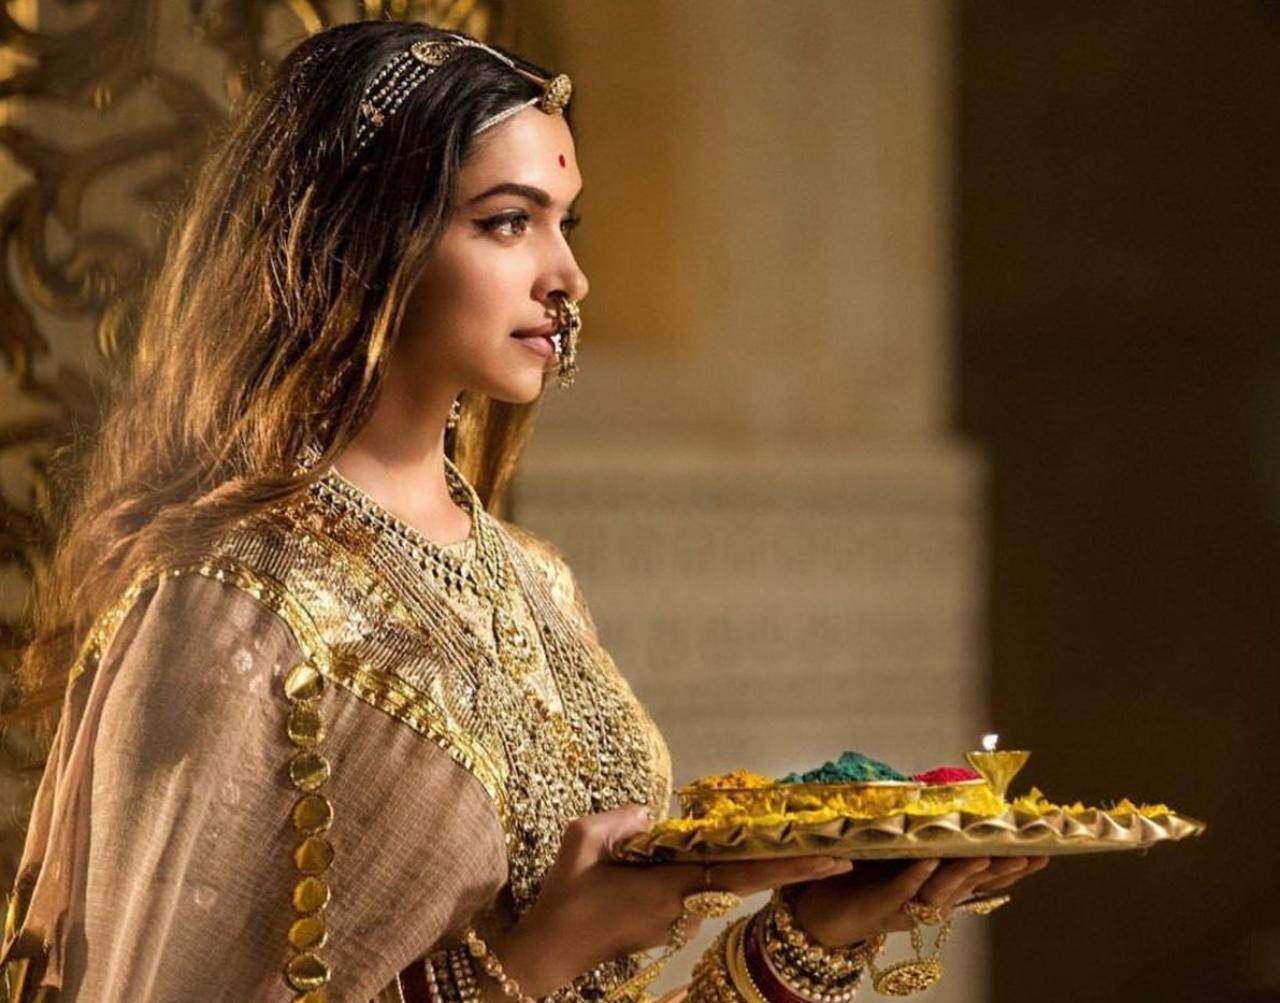 Deepika Padukone as Rani Padmaavati in Padmaavat 
In what can be called as one of Deepika's finest performance, the film brings out the resilience of the queen in the worst of times. The legendary queen defies stereotypes and challenges societal norms because of her beauty, intelligence, and bravery